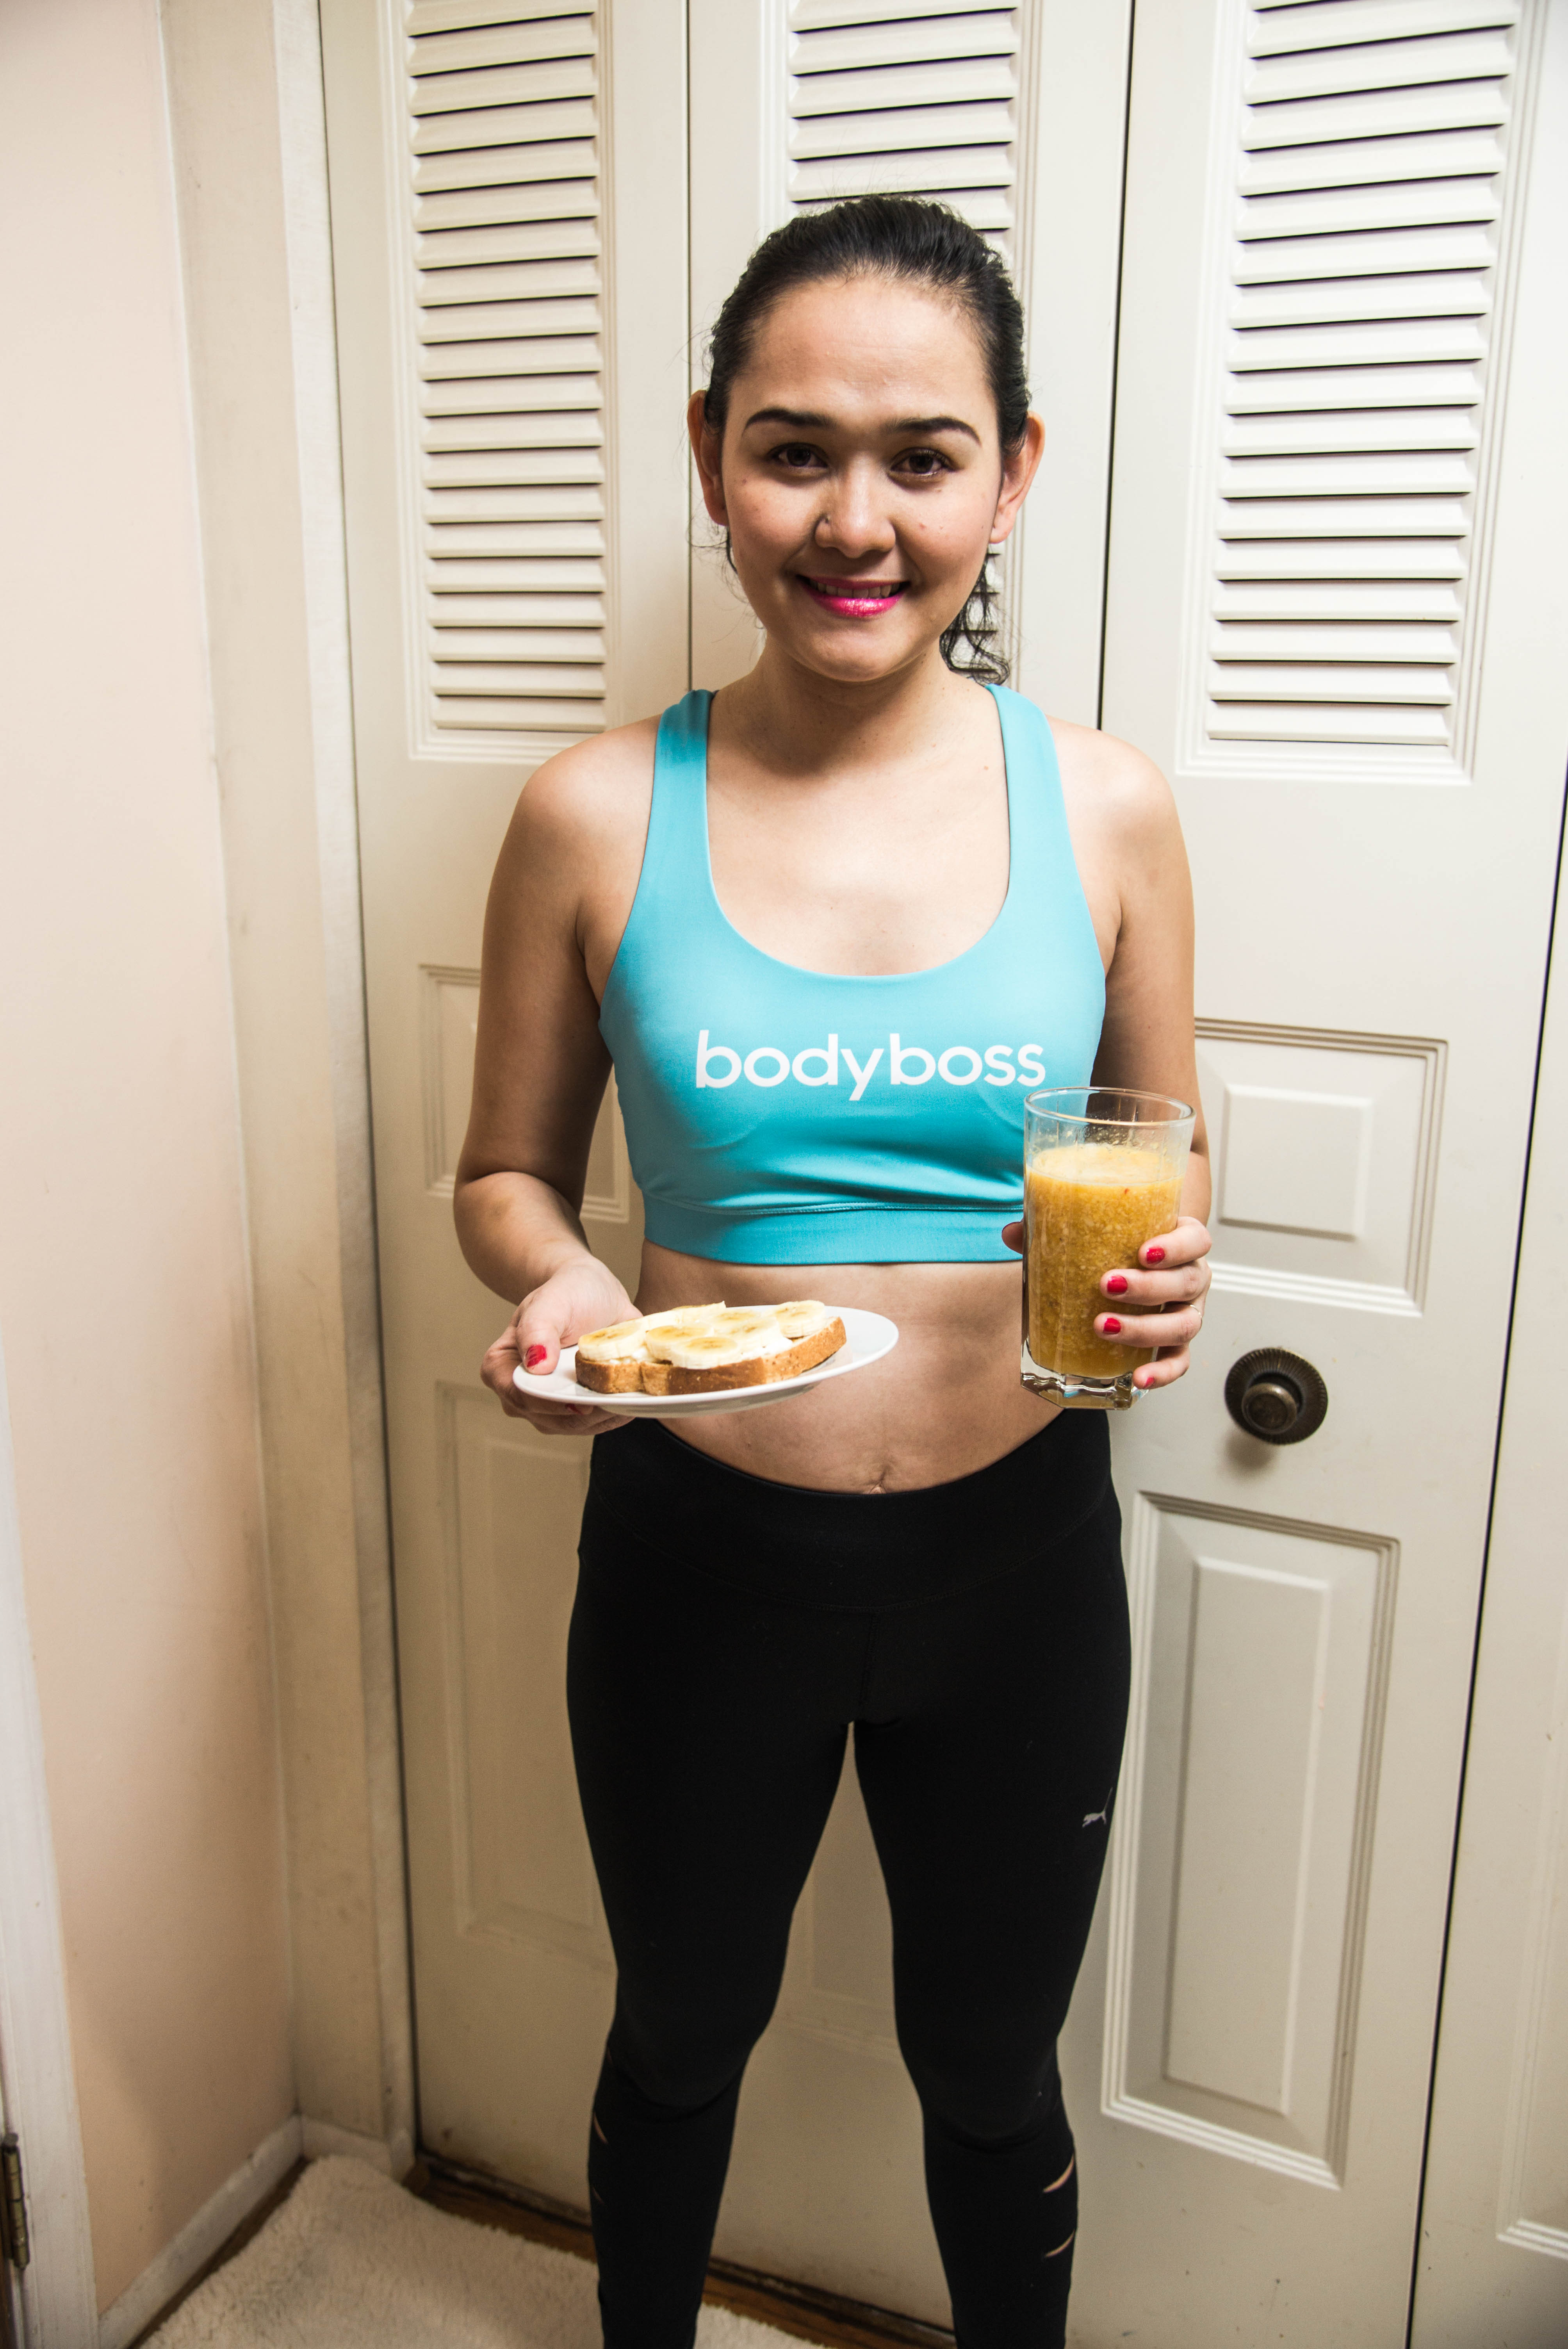 Working on my 2018 health & fitness goals with BodyBoss | Fitness & Nutrition Guide